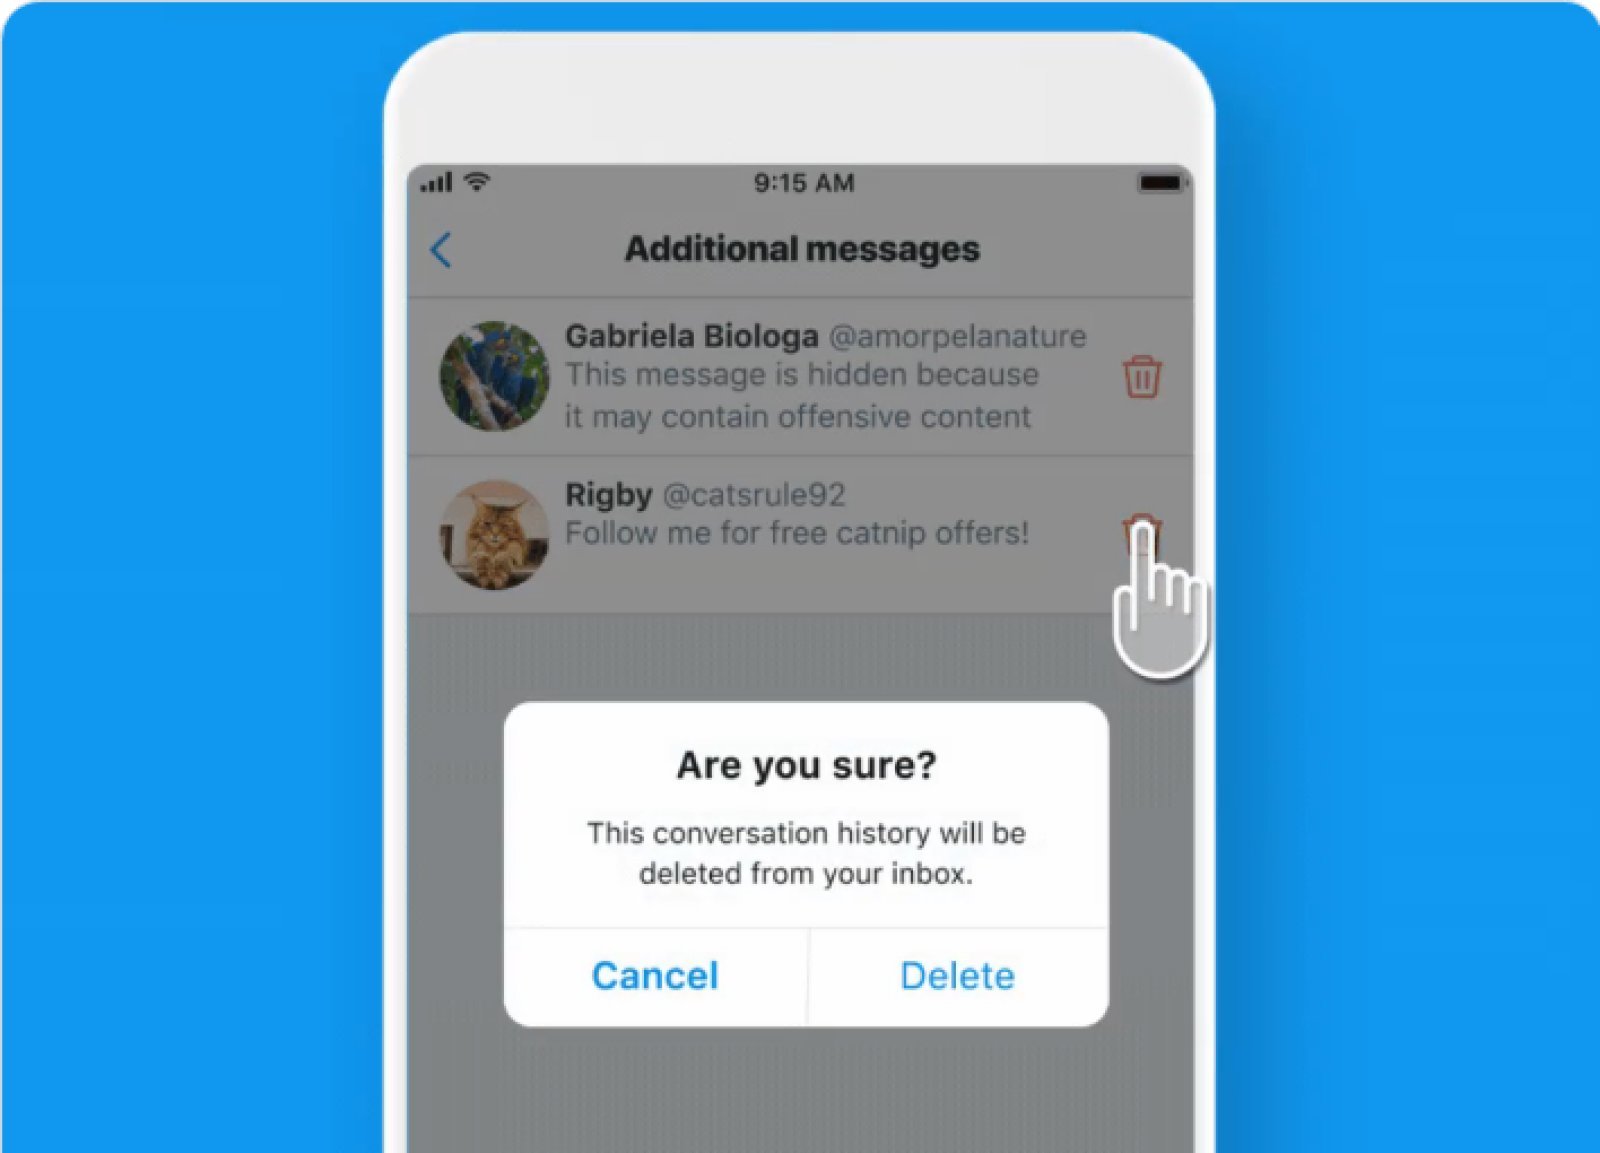 This New Twitter Feature Aims To Tackle Trolling By Filtering Out Potentially Abusive DMs